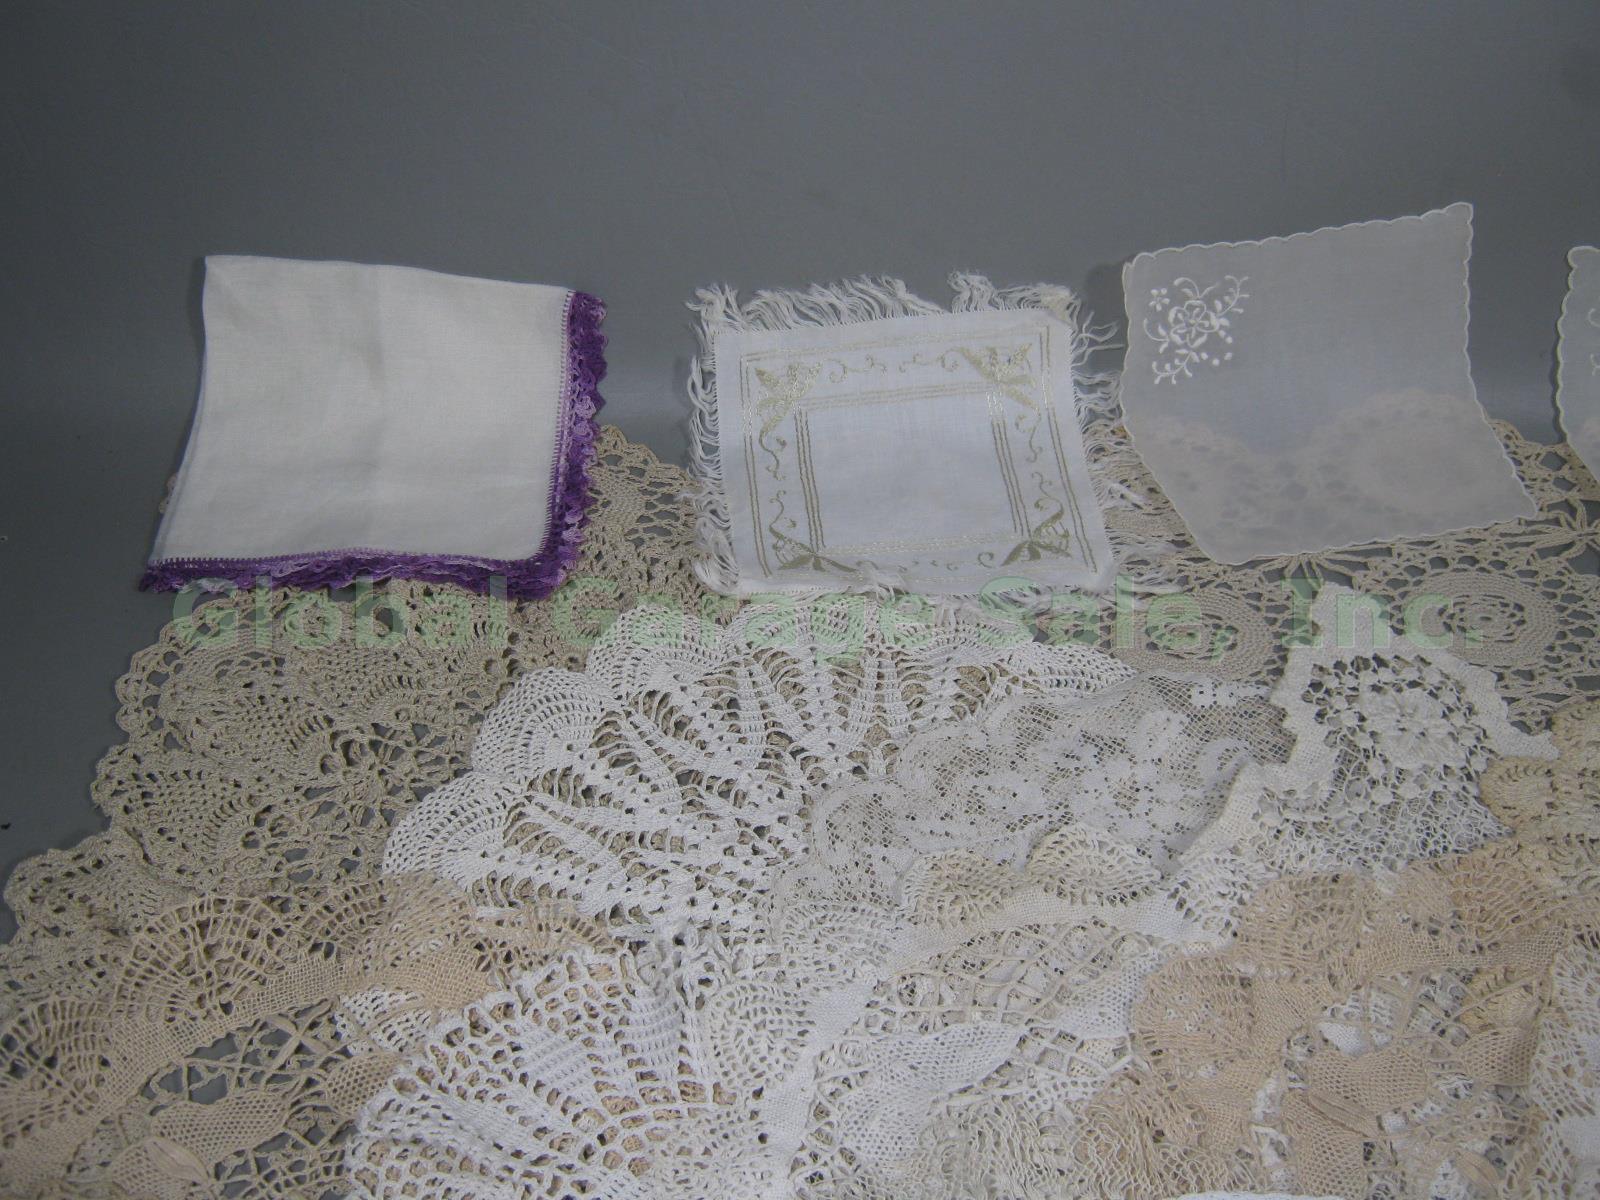 54 Vtg Antique Hand Crochet Lace Doily Arm Cover Hanky Napkin Table Runners Lot 3